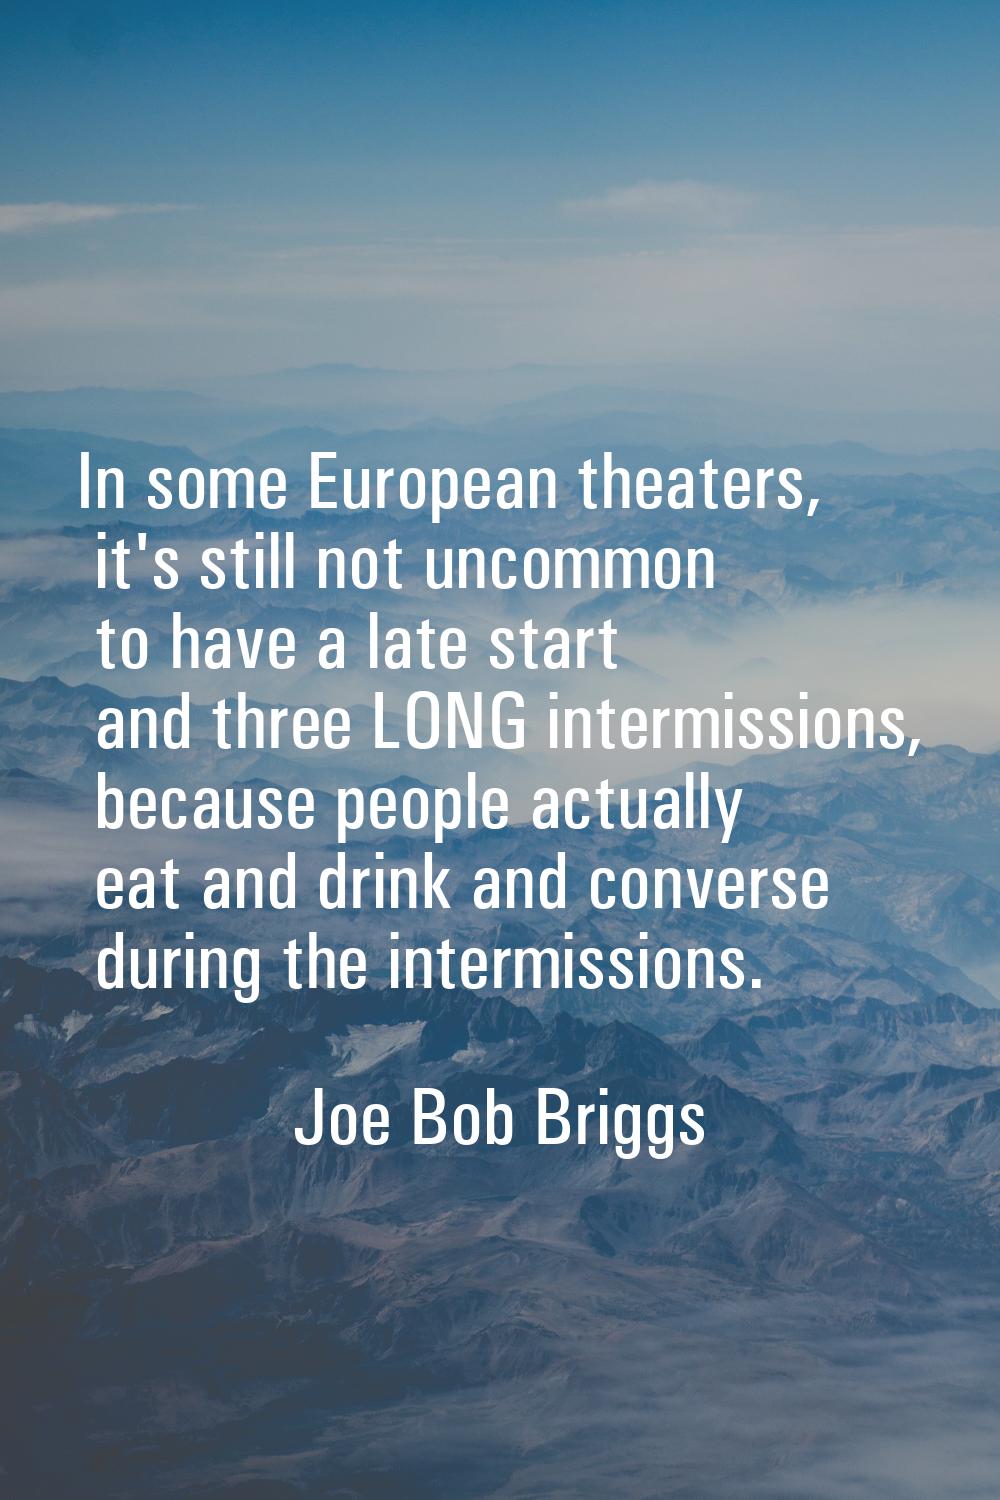 In some European theaters, it's still not uncommon to have a late start and three LONG intermission